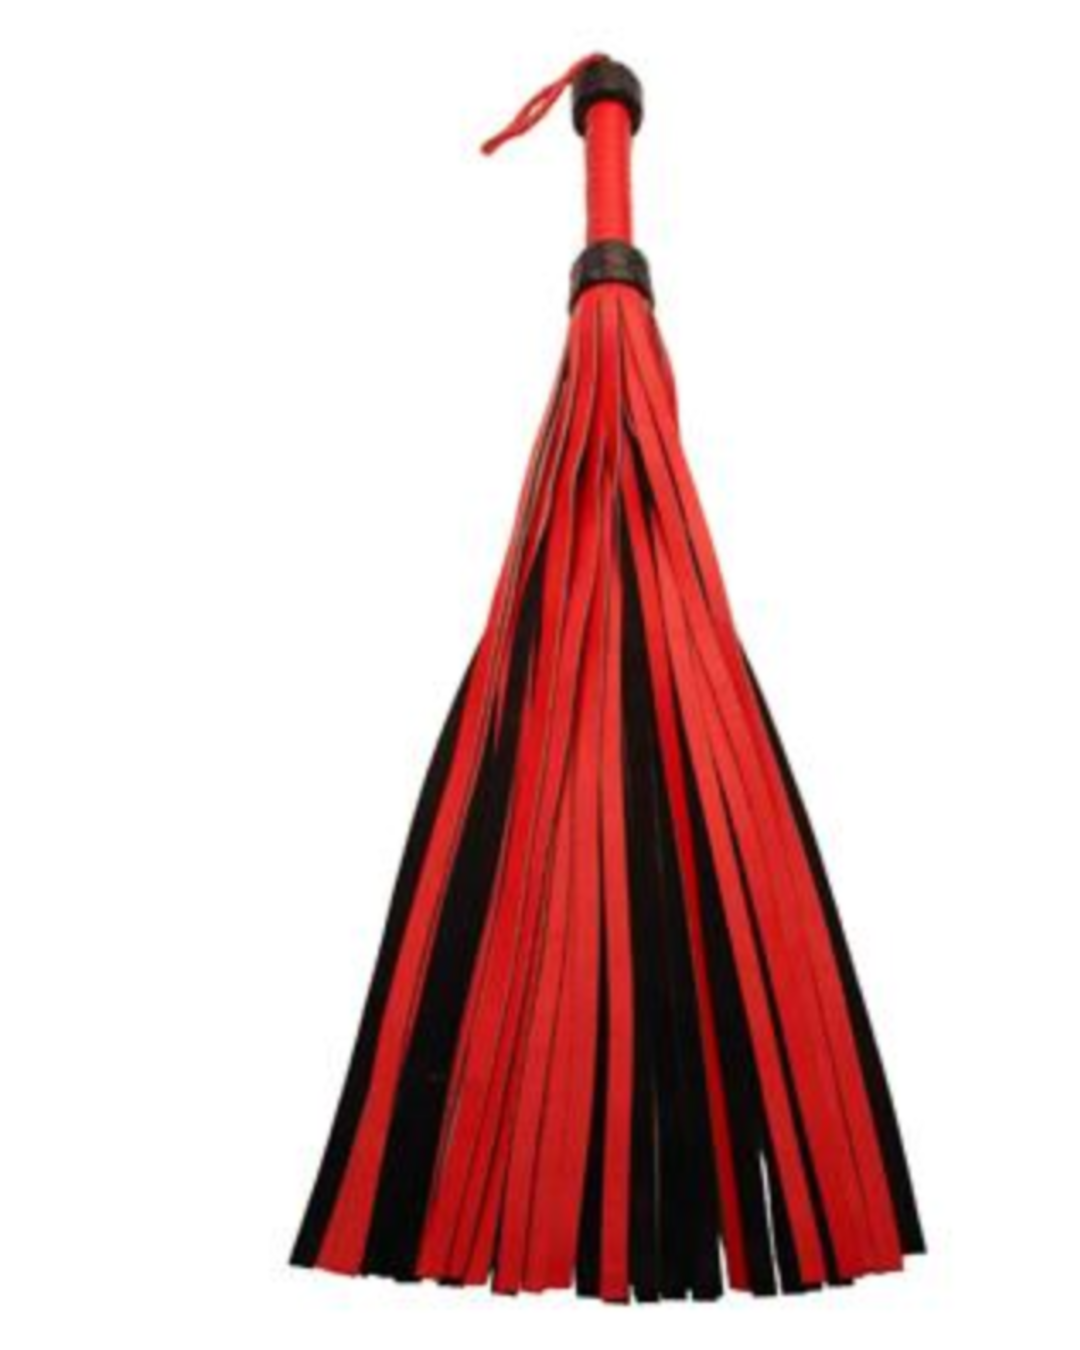 Heavy Tail Flogger by XR Brands tassles